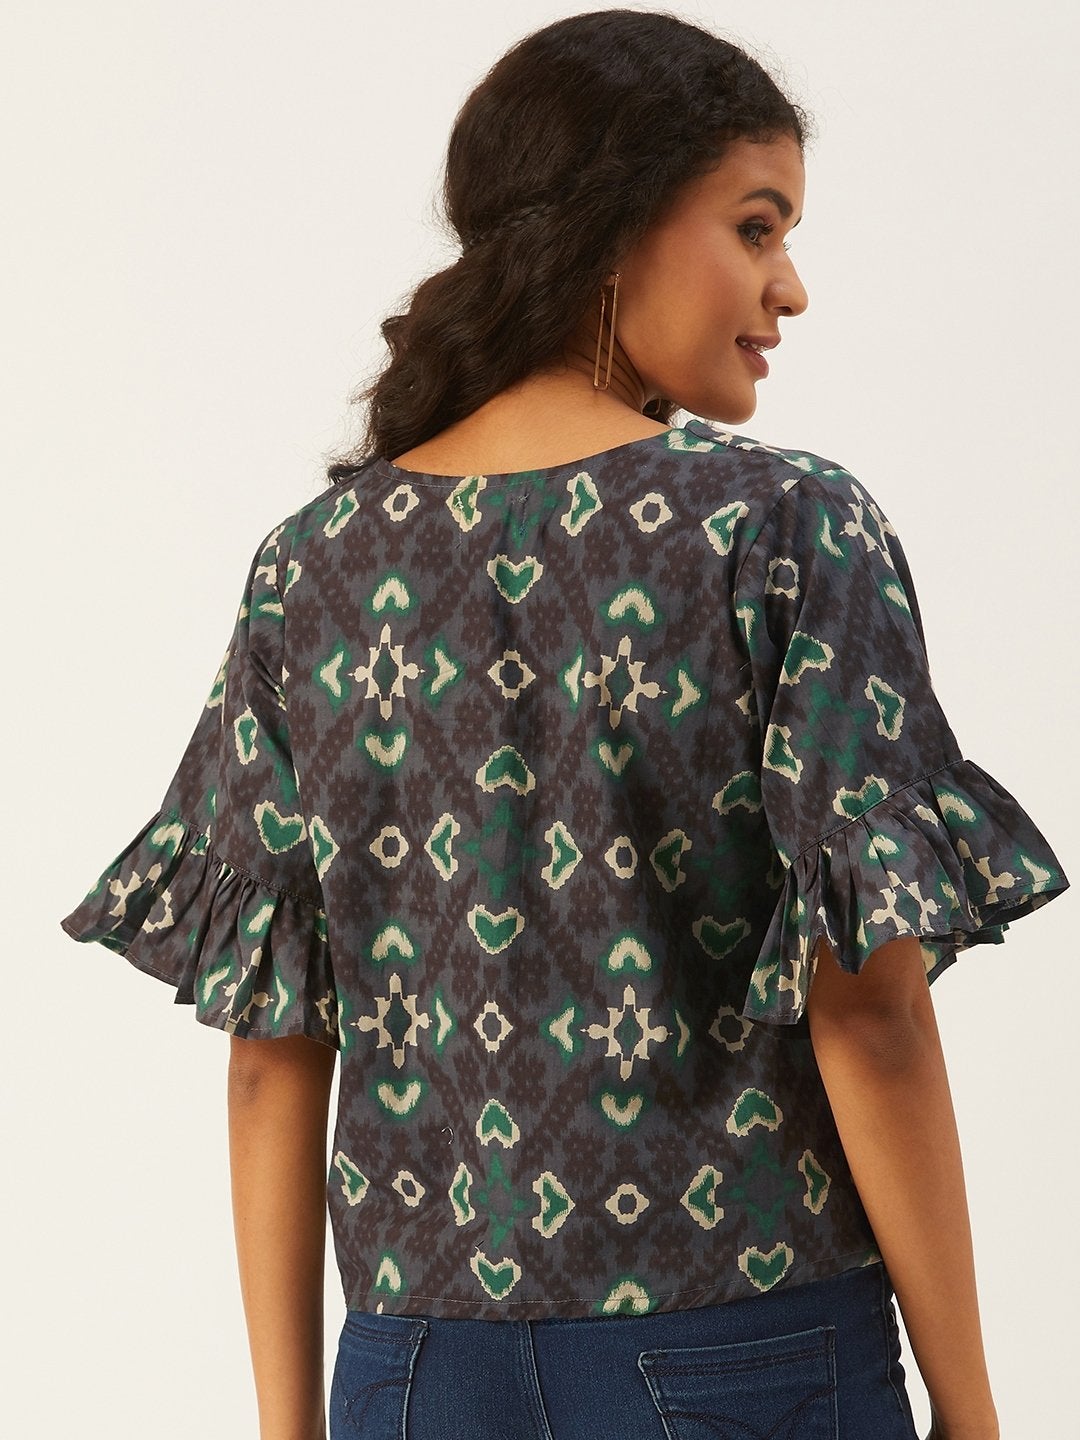 Women's Grey-Green Top  With Frill Sleeve - InWeave